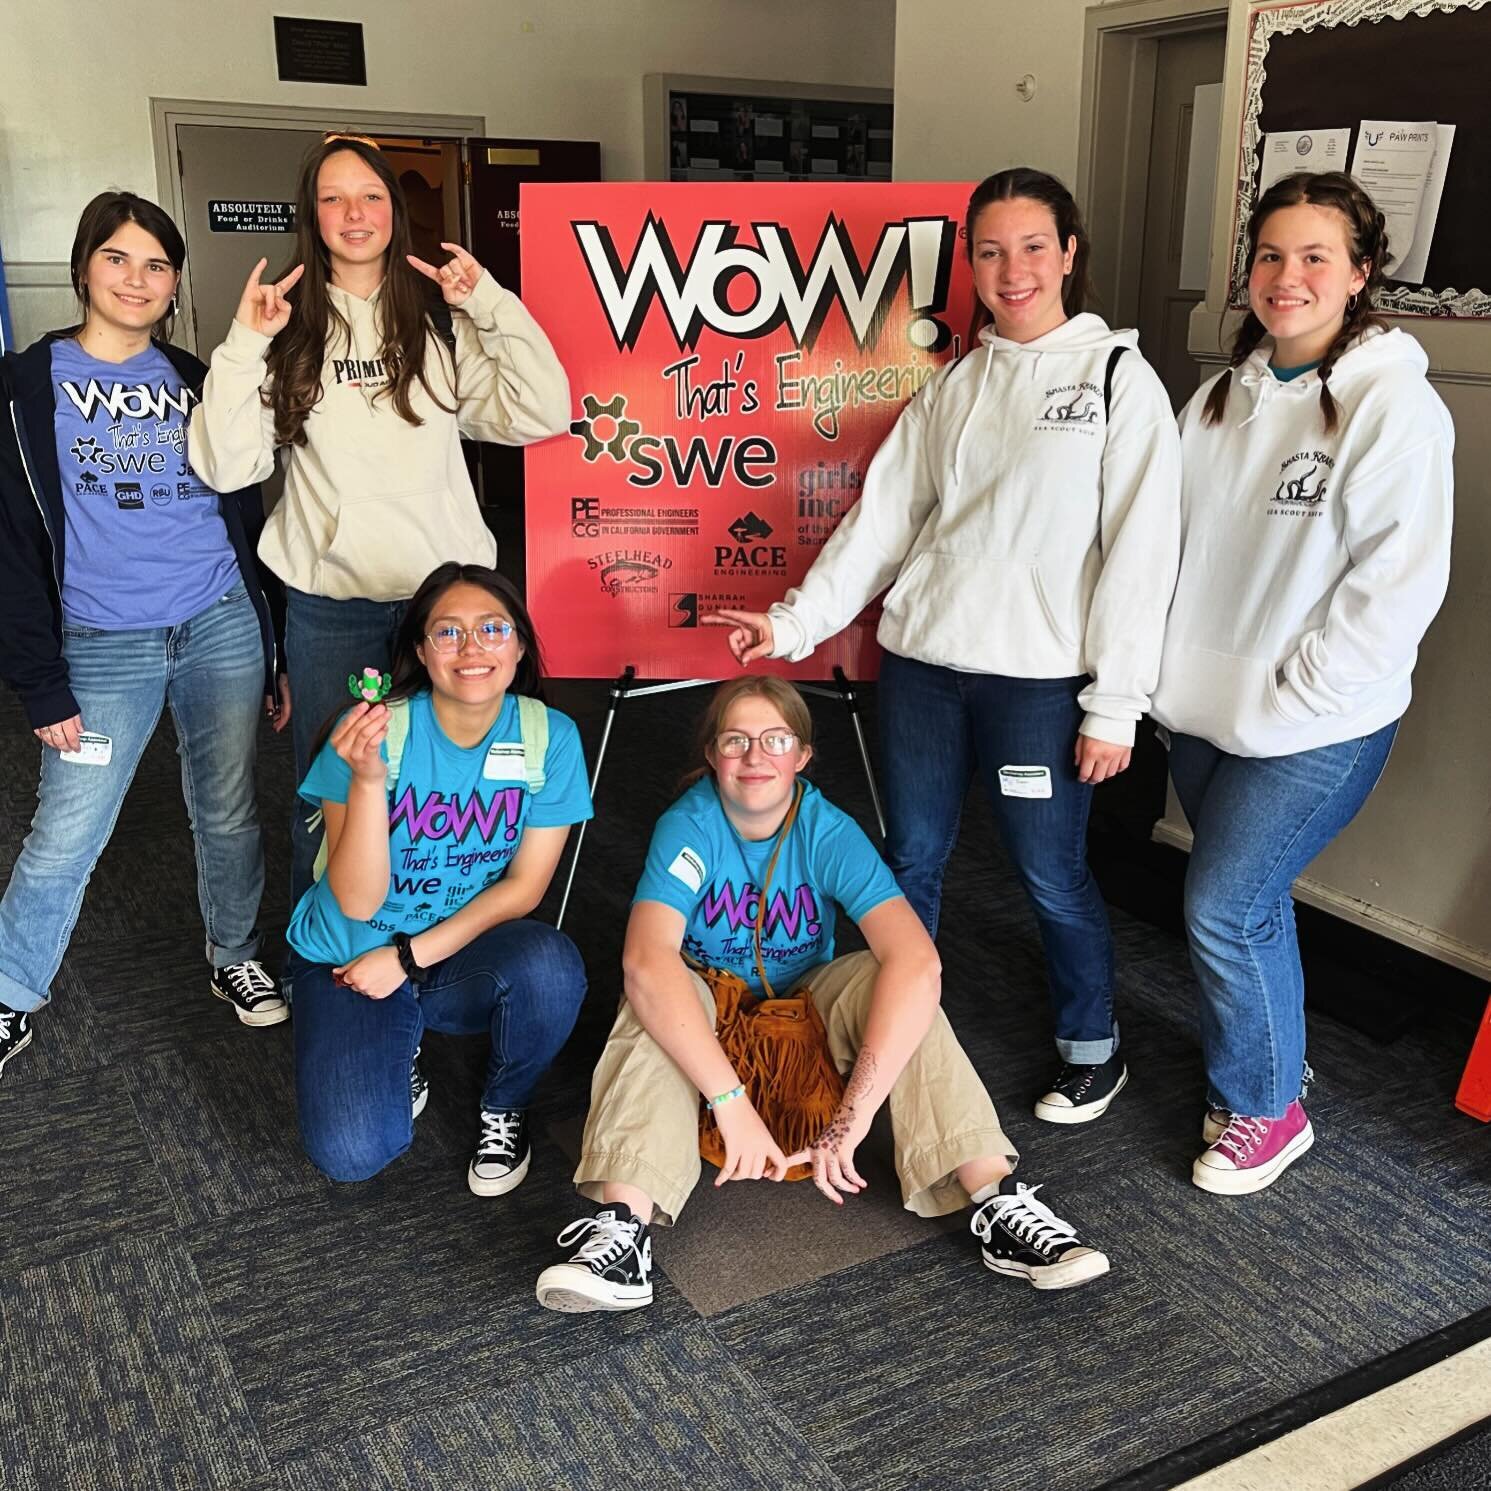 Six of our girls completed their community service requirement for their Apprentice rank today, volunteering with the Society of Women Engineers at their annual &ldquo;Wow! that&rsquo;s Engineering!&rdquo; event. The event hosted over 150 local girls